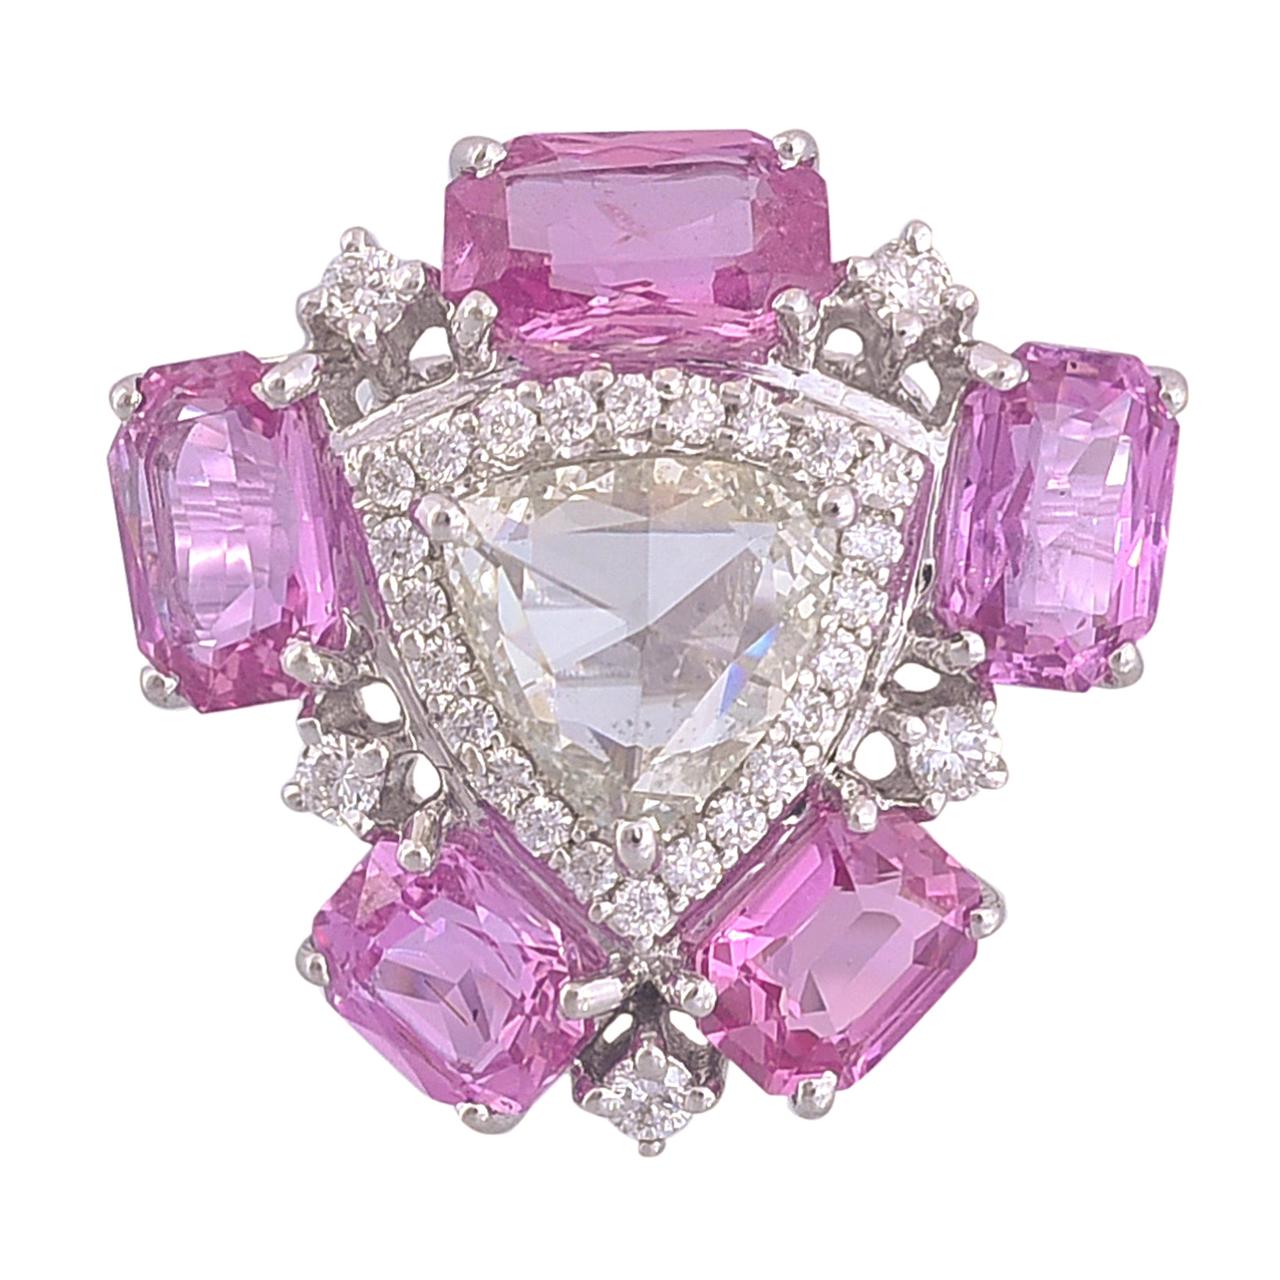 Set in 18k White Gold, Rose Cut Diamond and Pink Sapphire Cocktail Ring